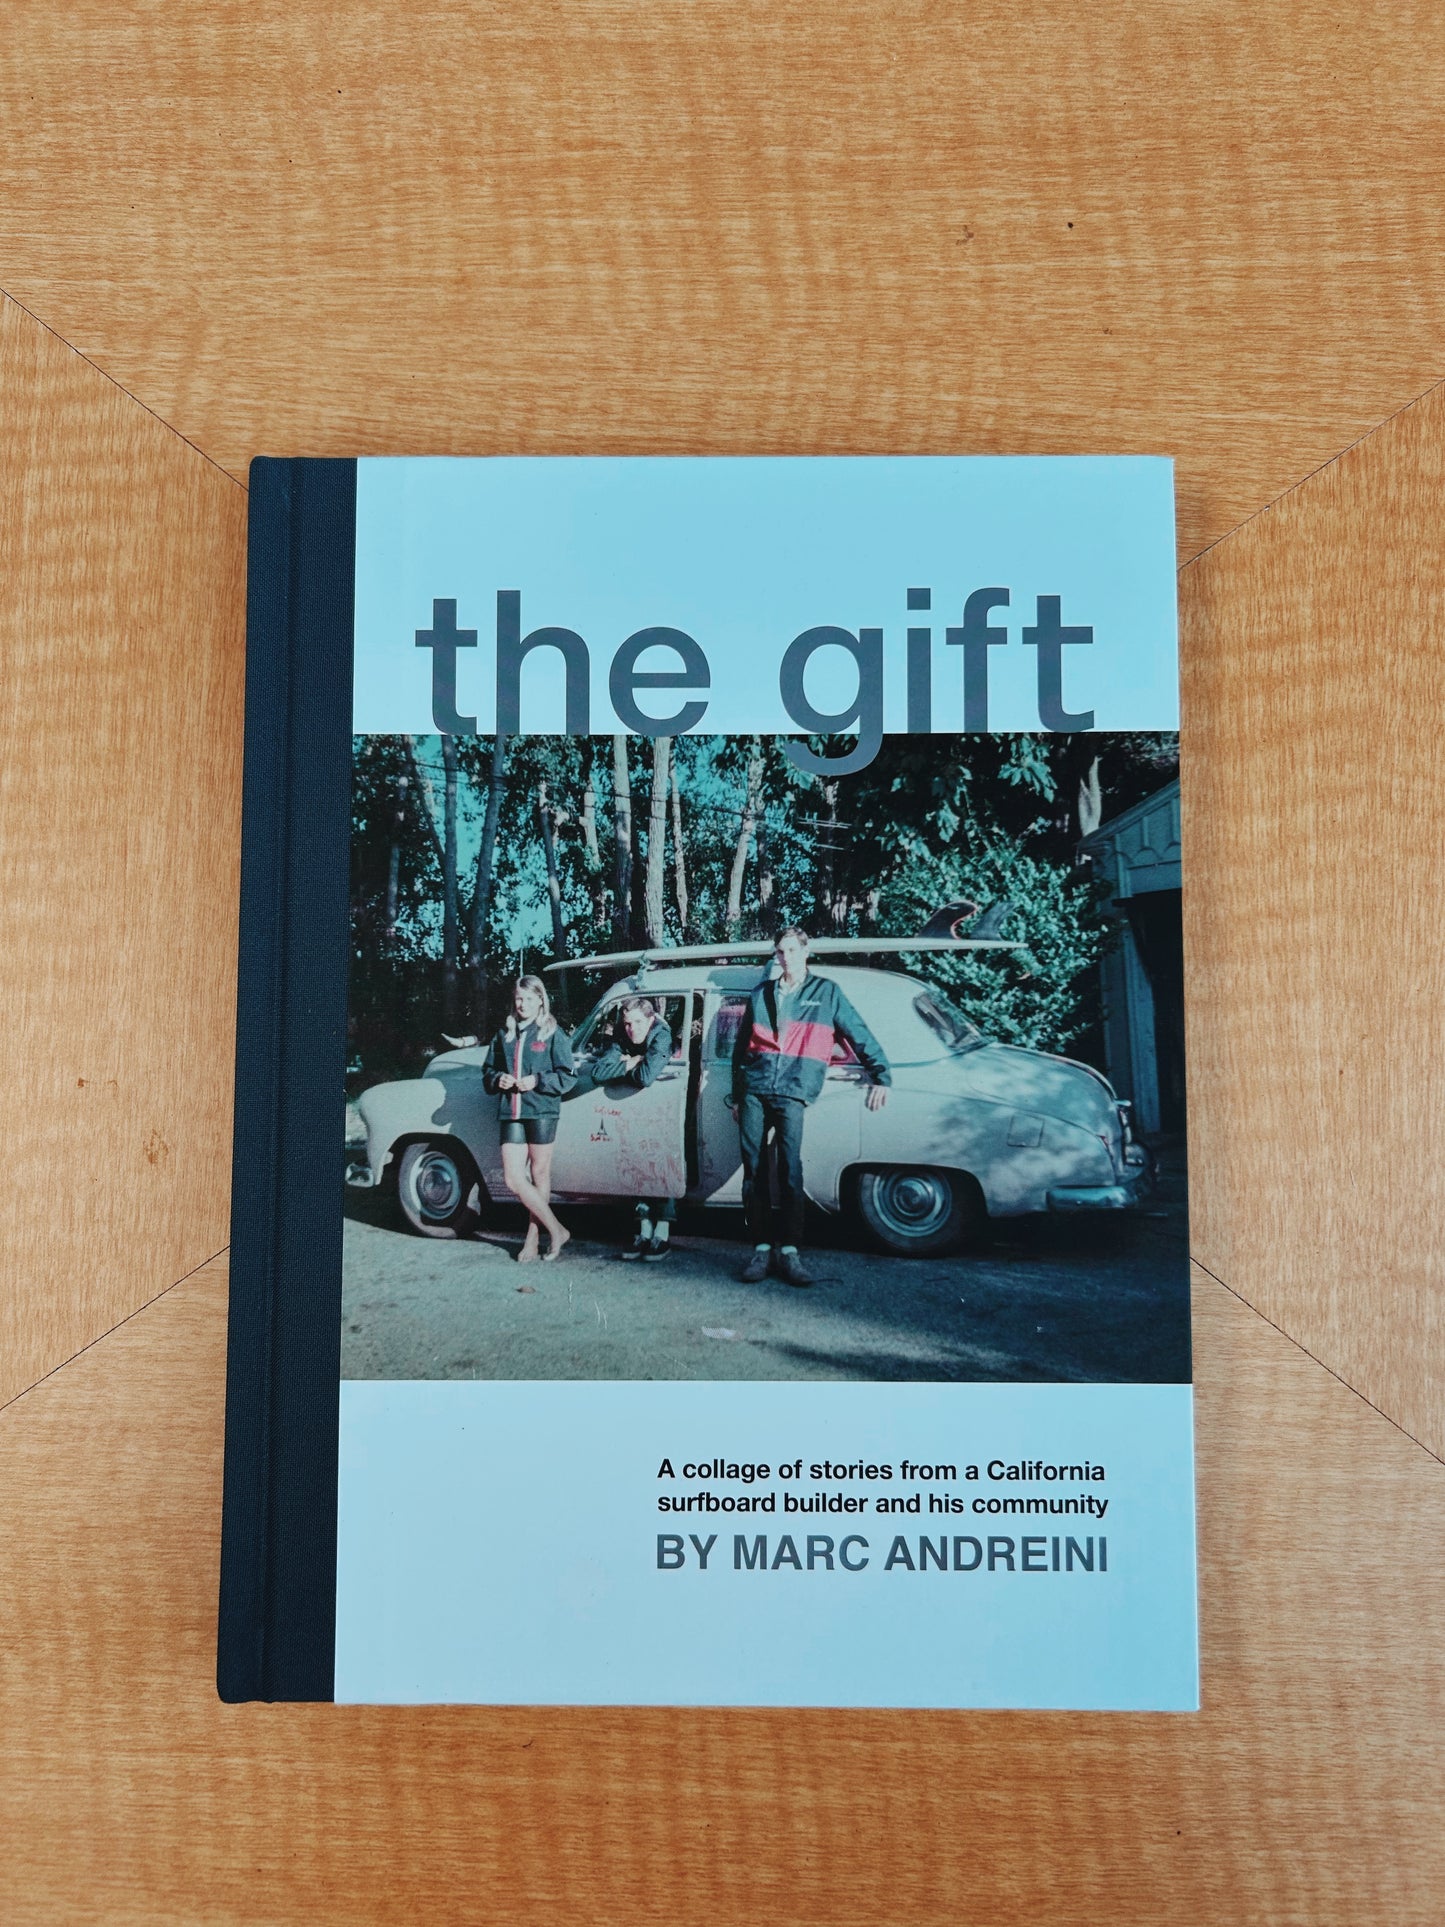 The Gift BY MARC ANDREINI